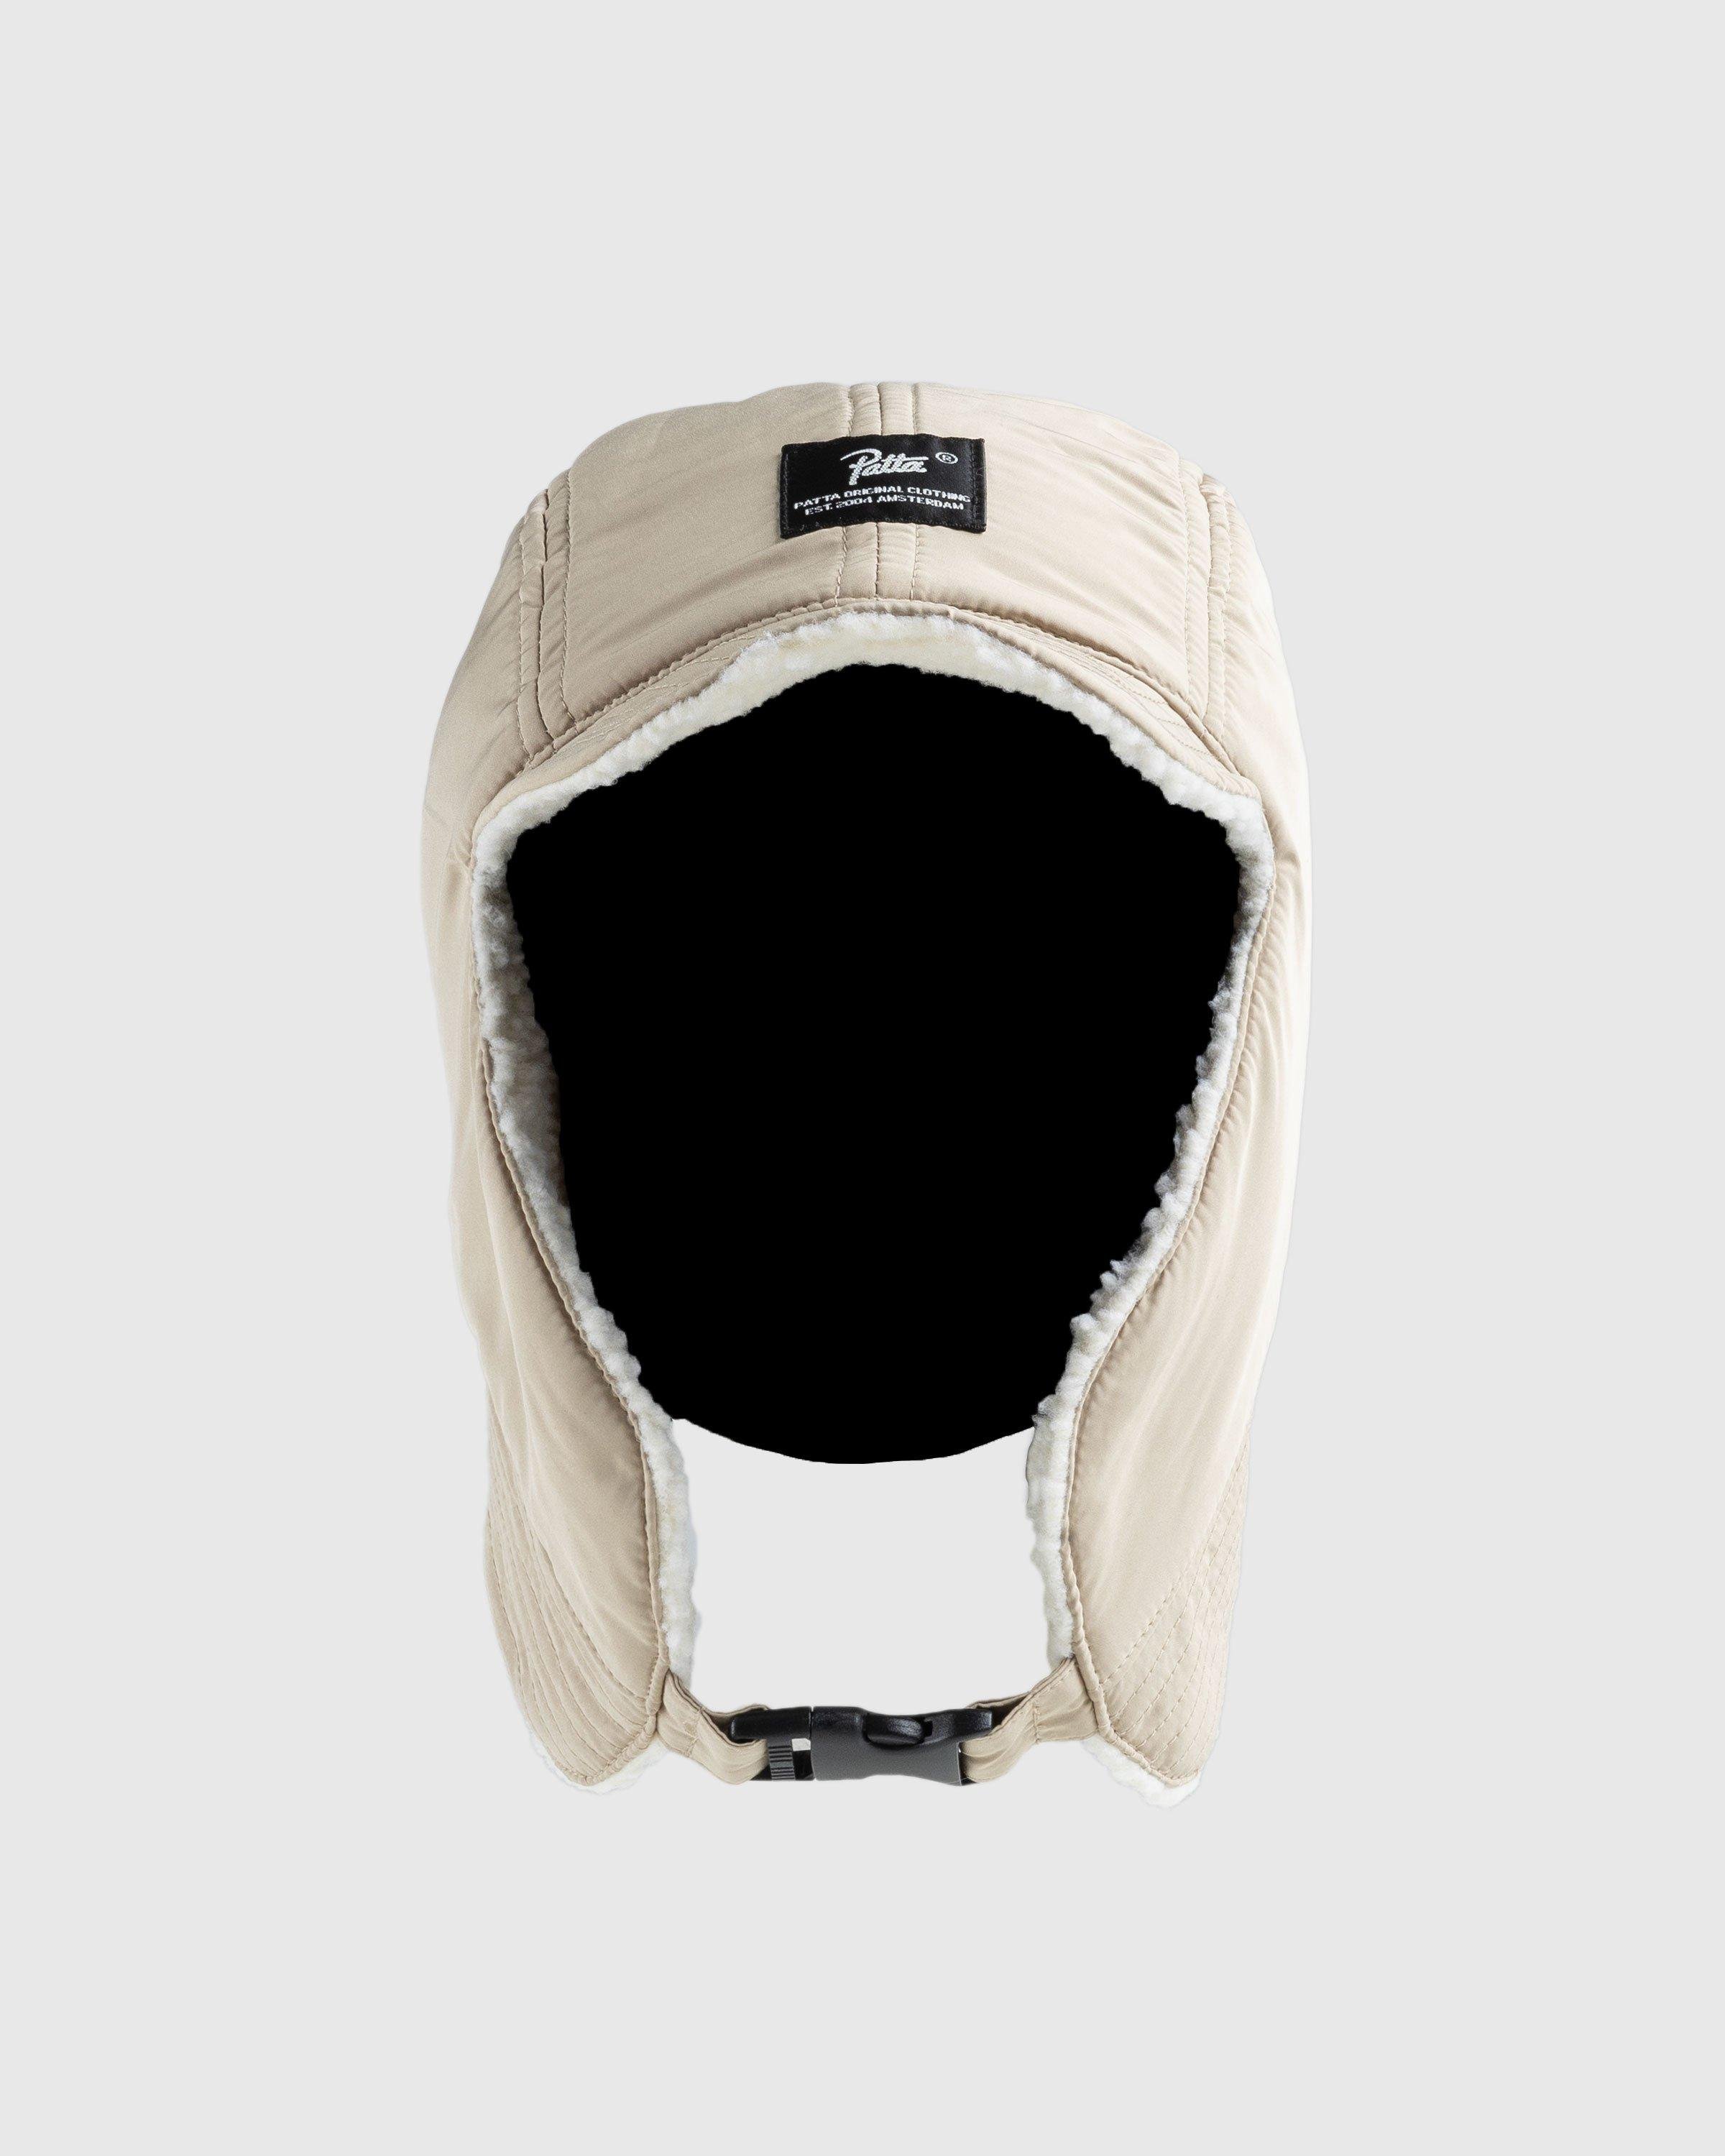 PattaReversible Flap Cap White by HIGHSNOBIETY